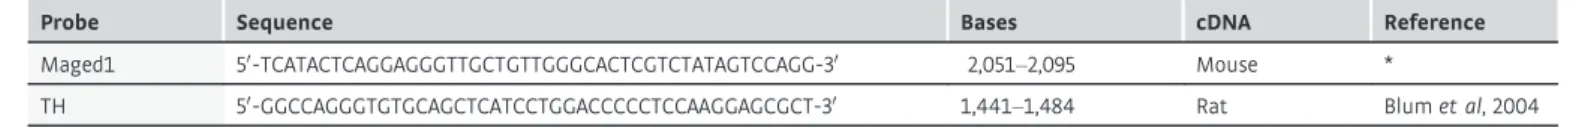 Table 1 . Oligonucleotide probes sequences used for in situ hybridization.